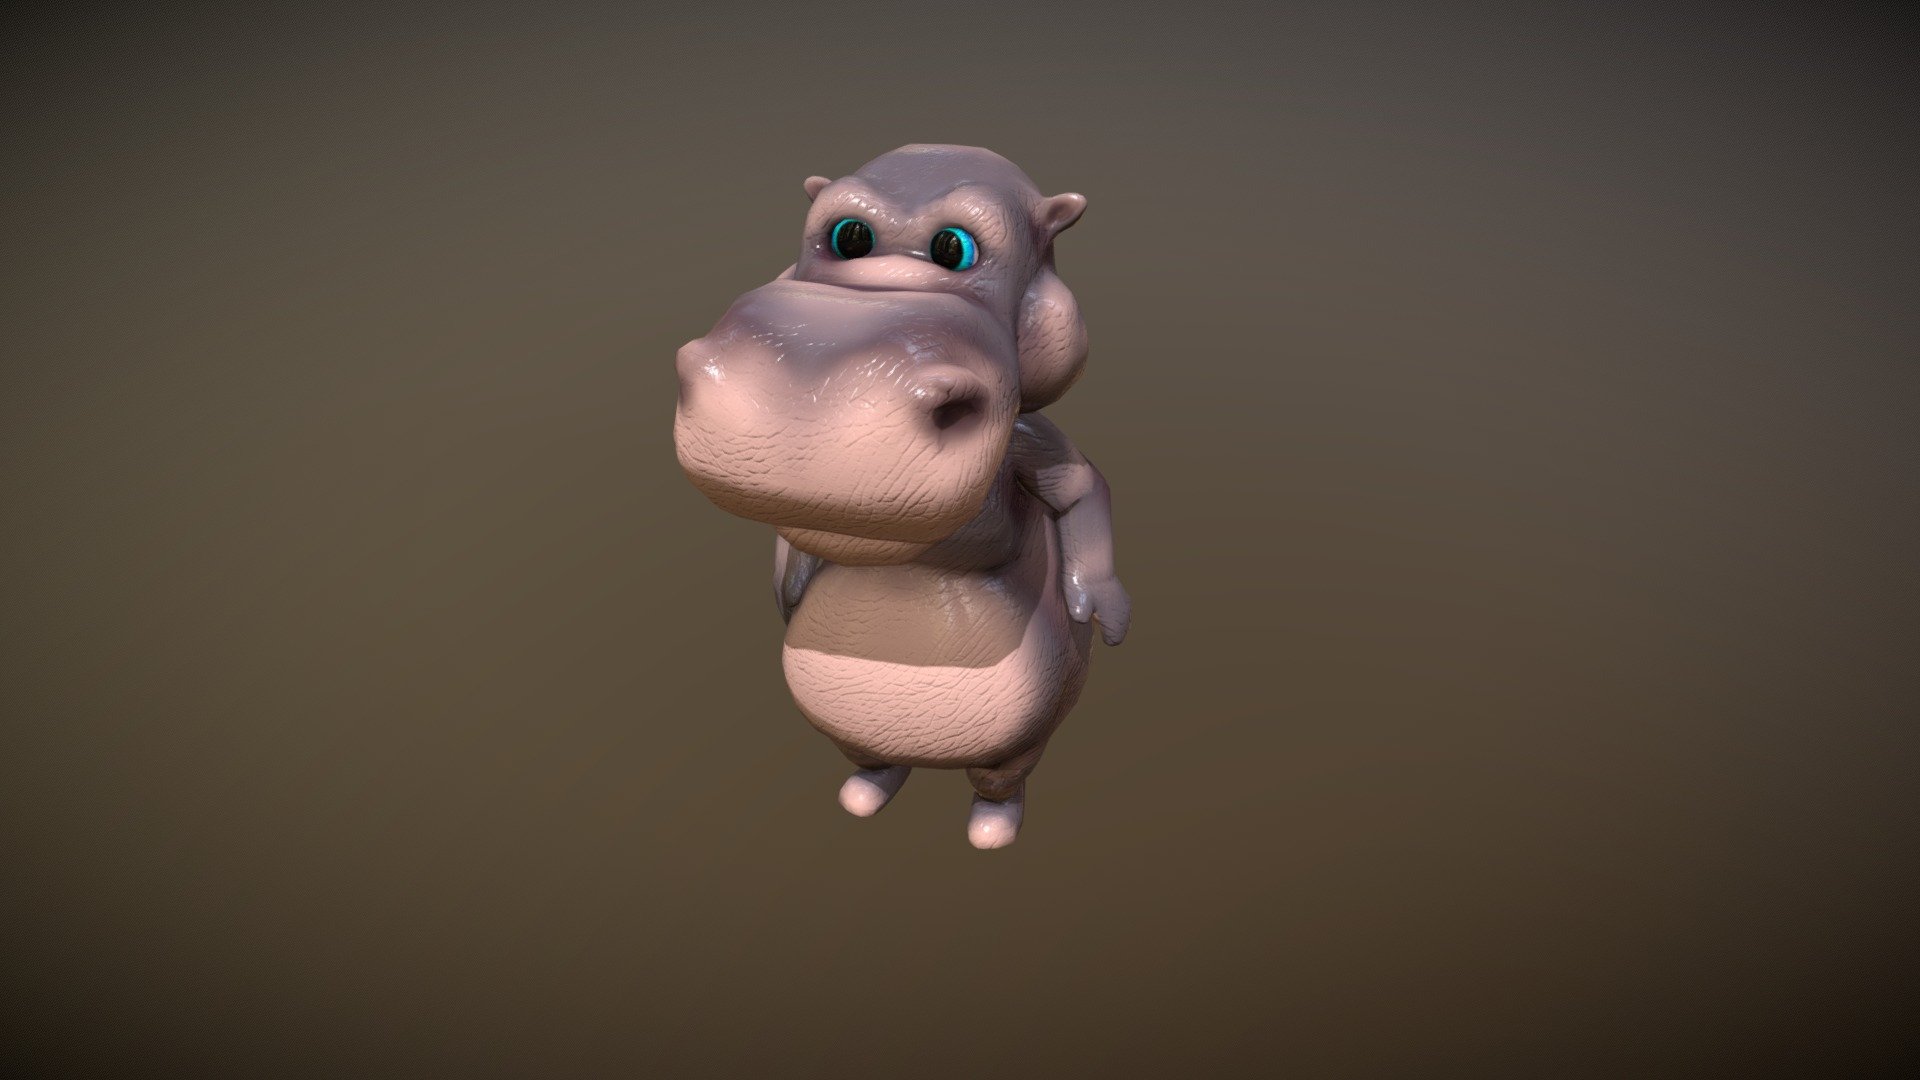 Animated Hippo Model with 44 animations.

The hippo is animated and rigged, ready to be used in your games and projects.



44 animations in total:

- Dance (6)

- Death

- Happy Walk (3)

- Hurt (2)

- Idle (4)

- Jump (4)

- Looking Around

- Run Forward

- Standing Jump

- Talking (2)

- Throw Item

- Thumb Up

- Victory (6)

- Walk (6)

- Waling Backwars

- Warming Up



Contact:

For questions, concerns or assistance please contact us via email: info@dexsoft-games.com


 - Animated Hippo Model - Buy Royalty Free 3D model by Dexsoft Games (@dexsoft-games) 3d model